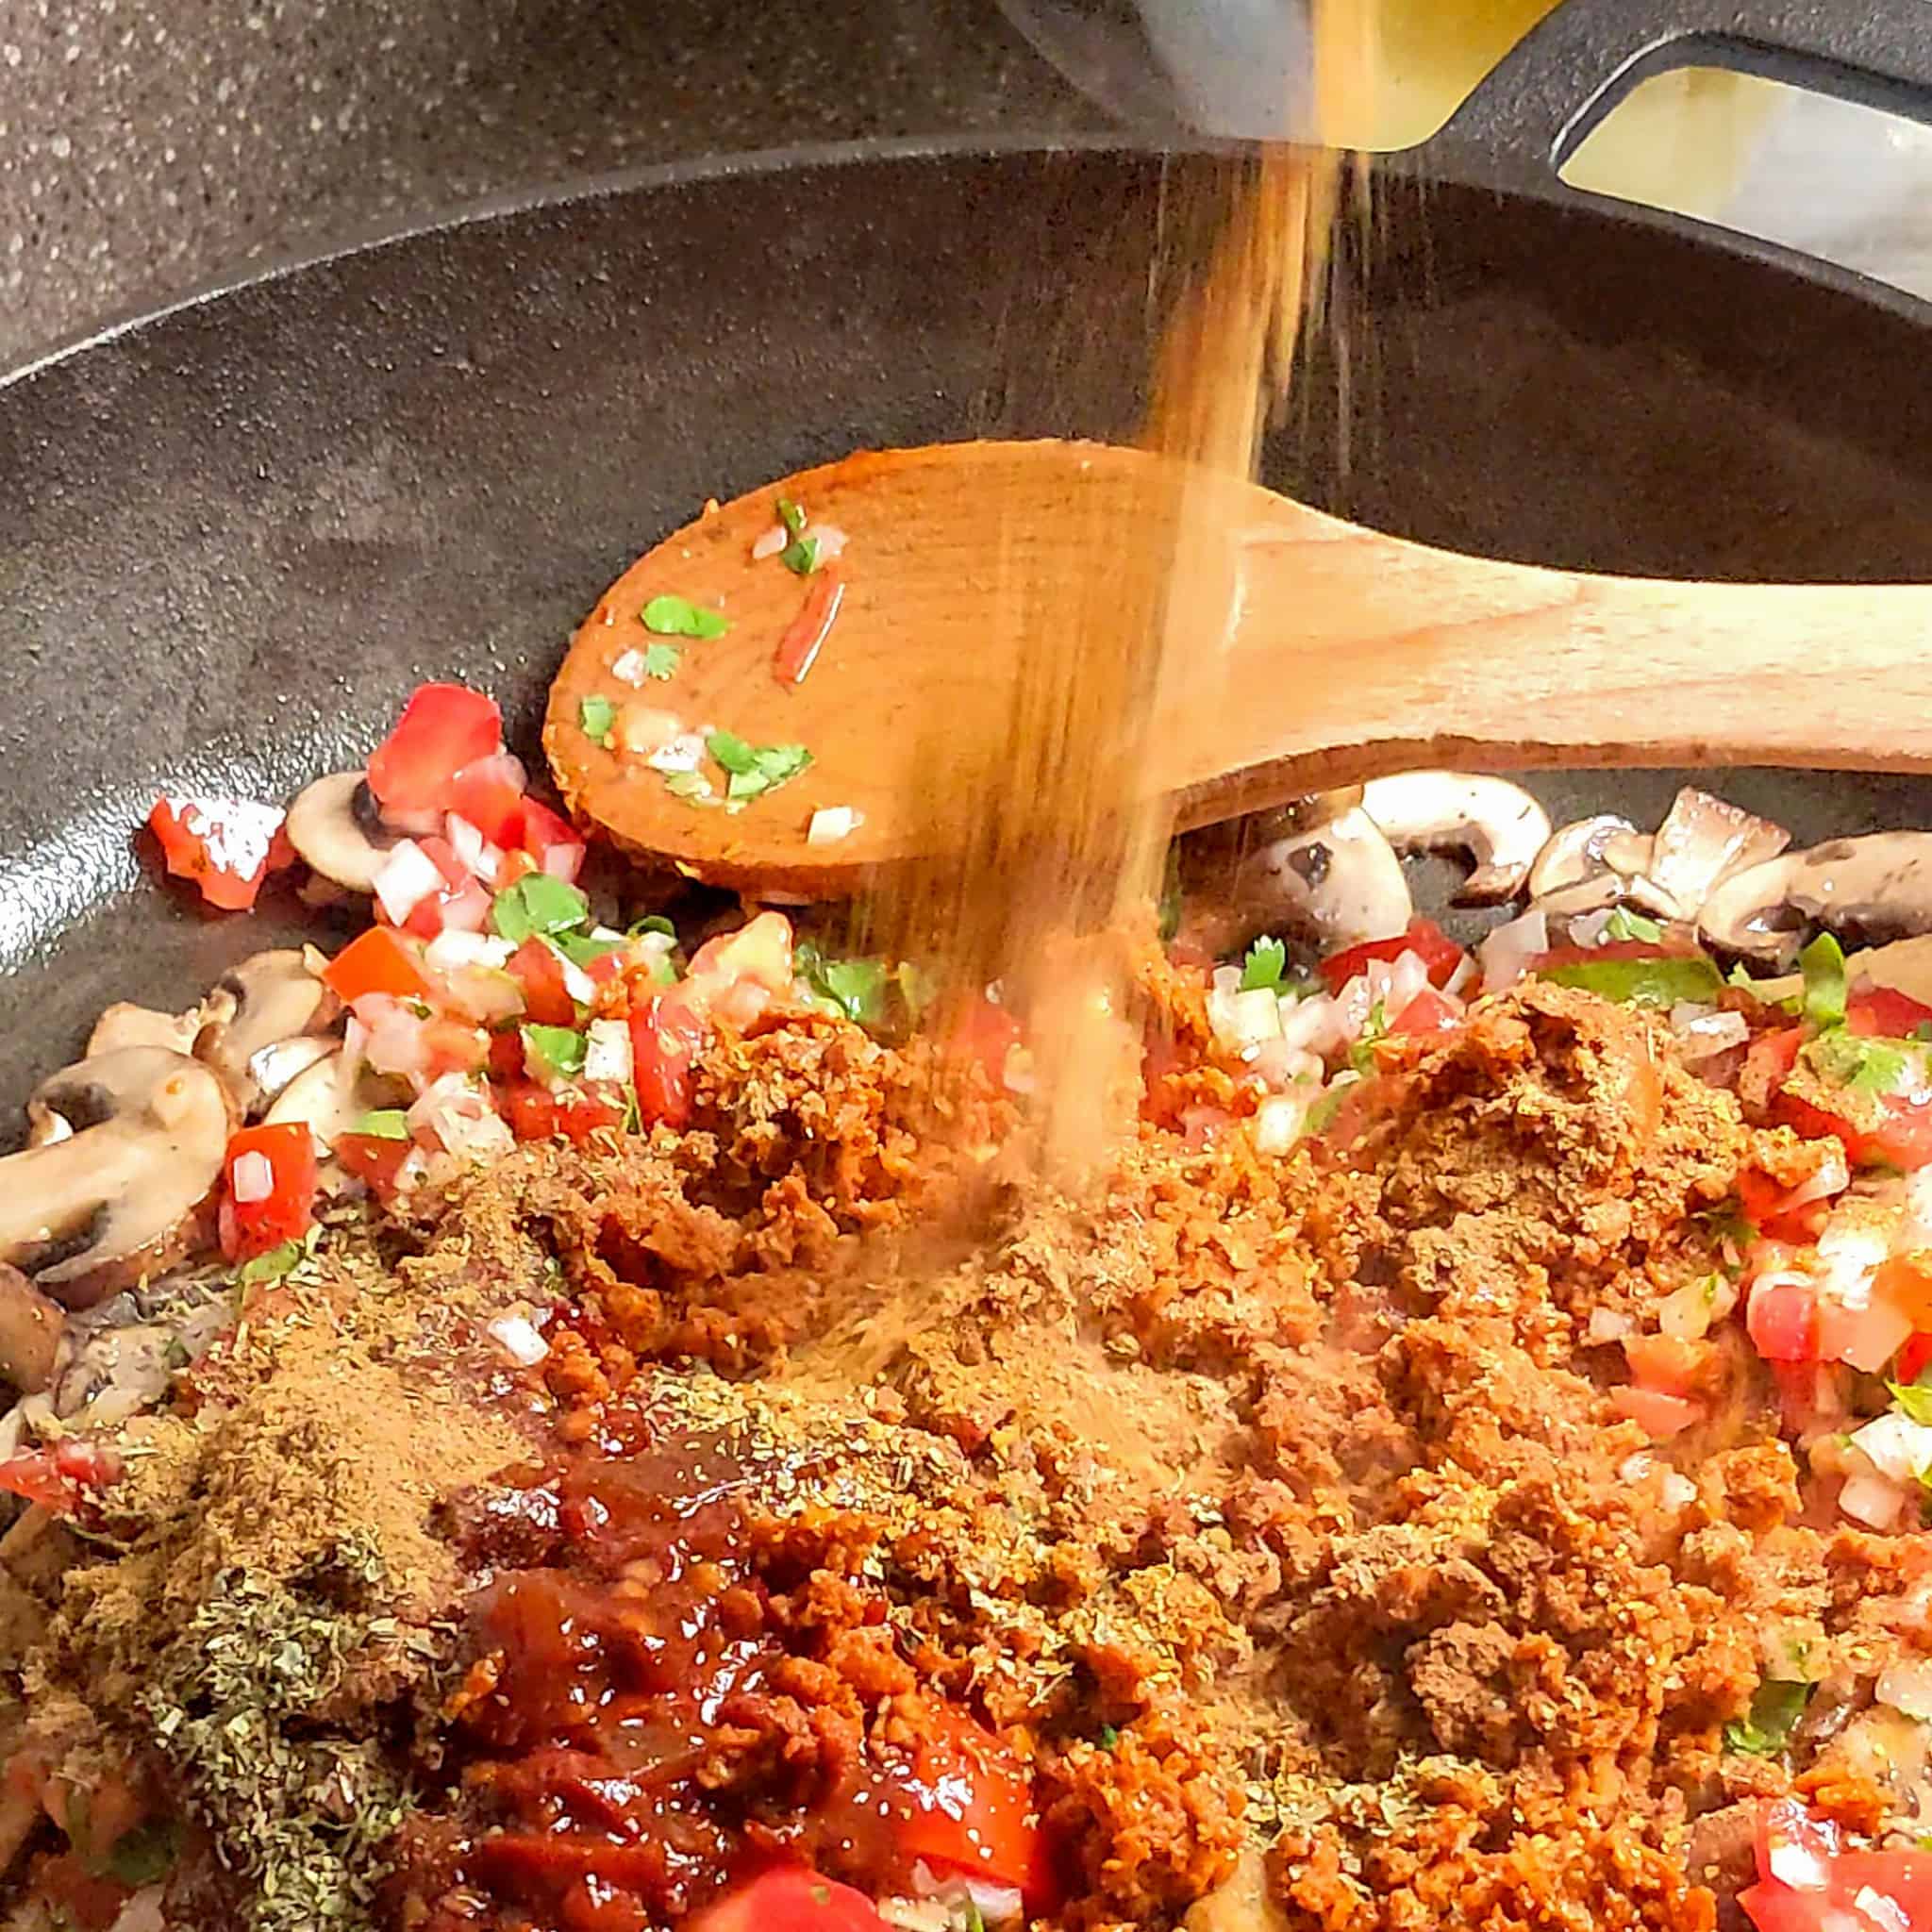 seasoning being added to the chipotle in adobo, soy chorizo, pico de gallo vegetables, and browned sliced mushrooms mixture in a large wide cast iron skillet